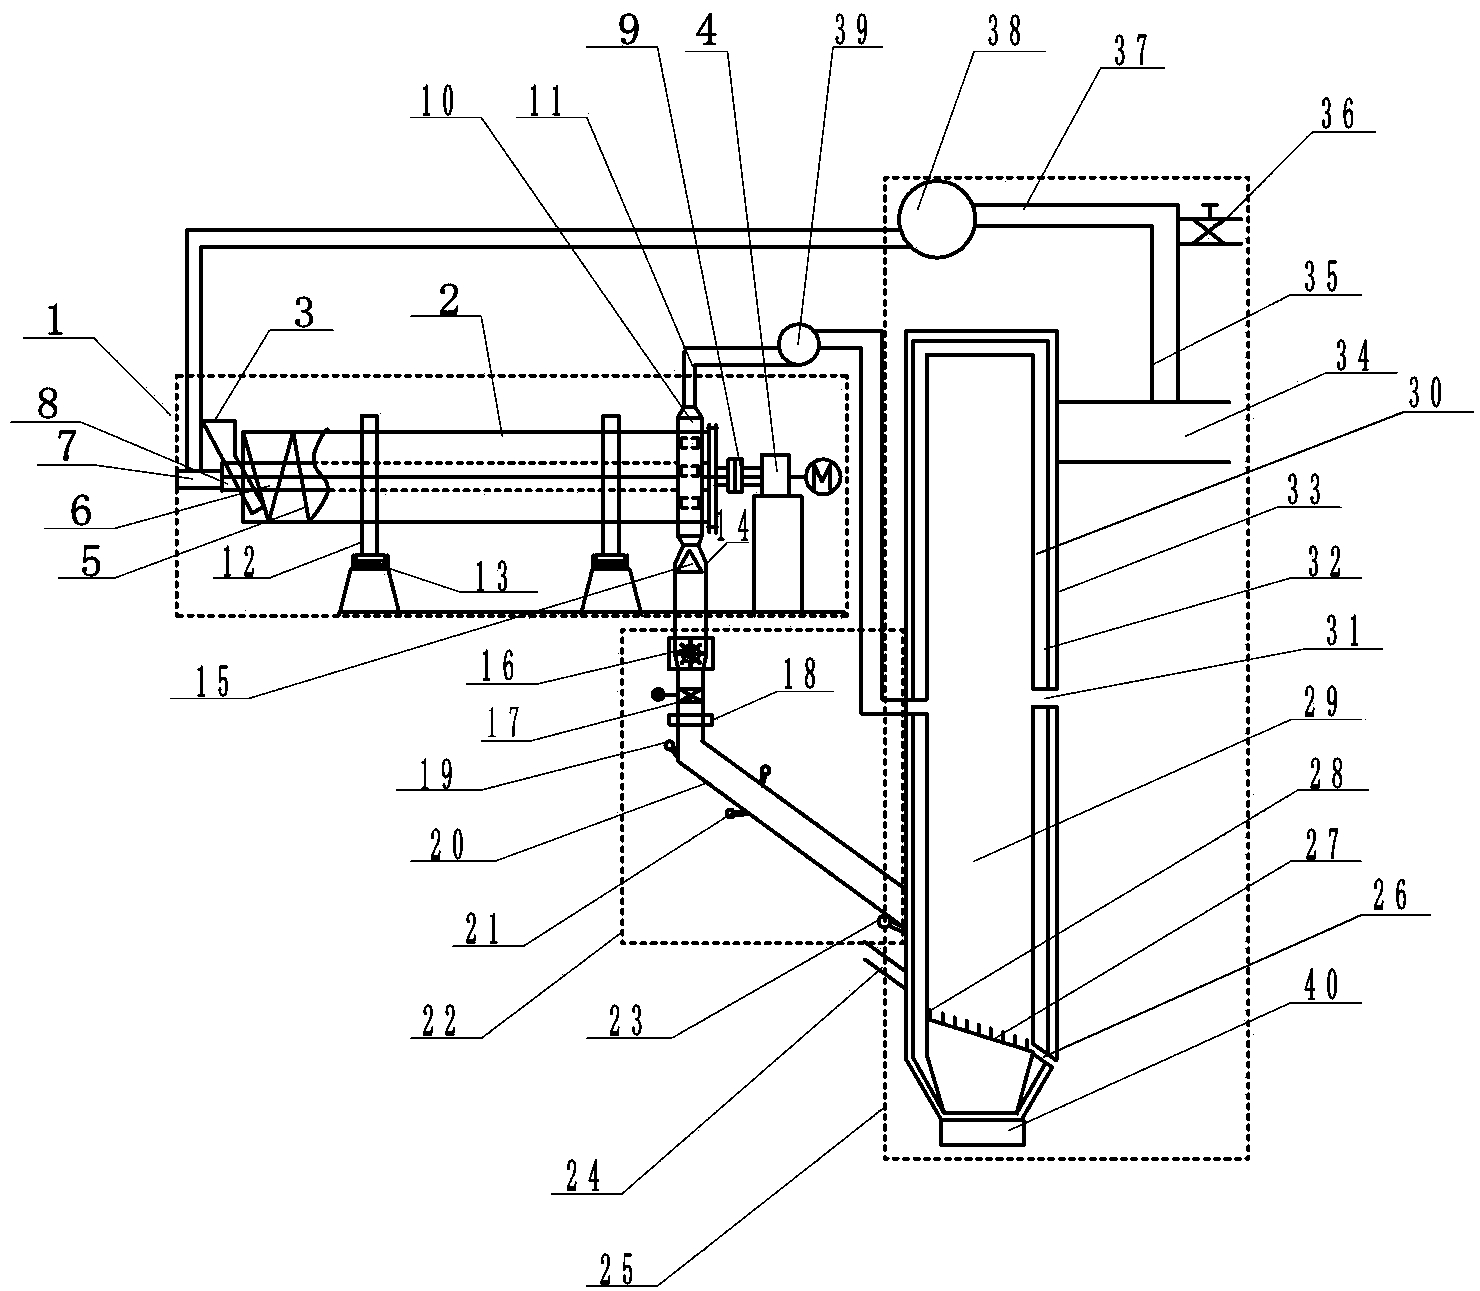 Fluidized bed furnace device utilizing smoke circulation to dry kitchen garbage